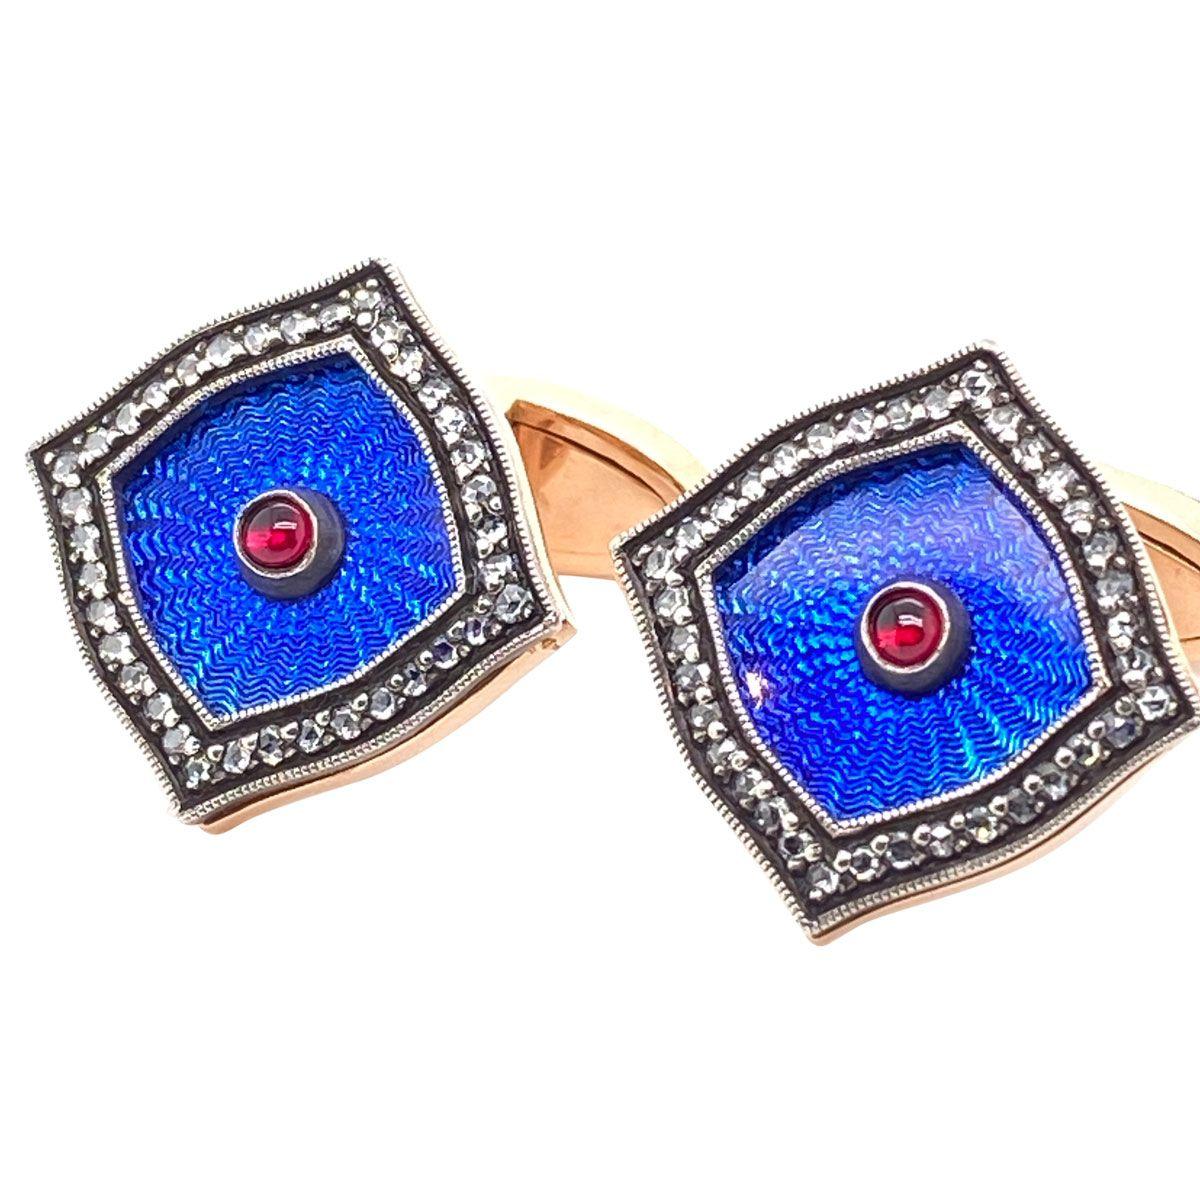 Contemporary 14 Karat Rose Gold Enamel Diamond and Ruby Russian Crafted Cufflinks